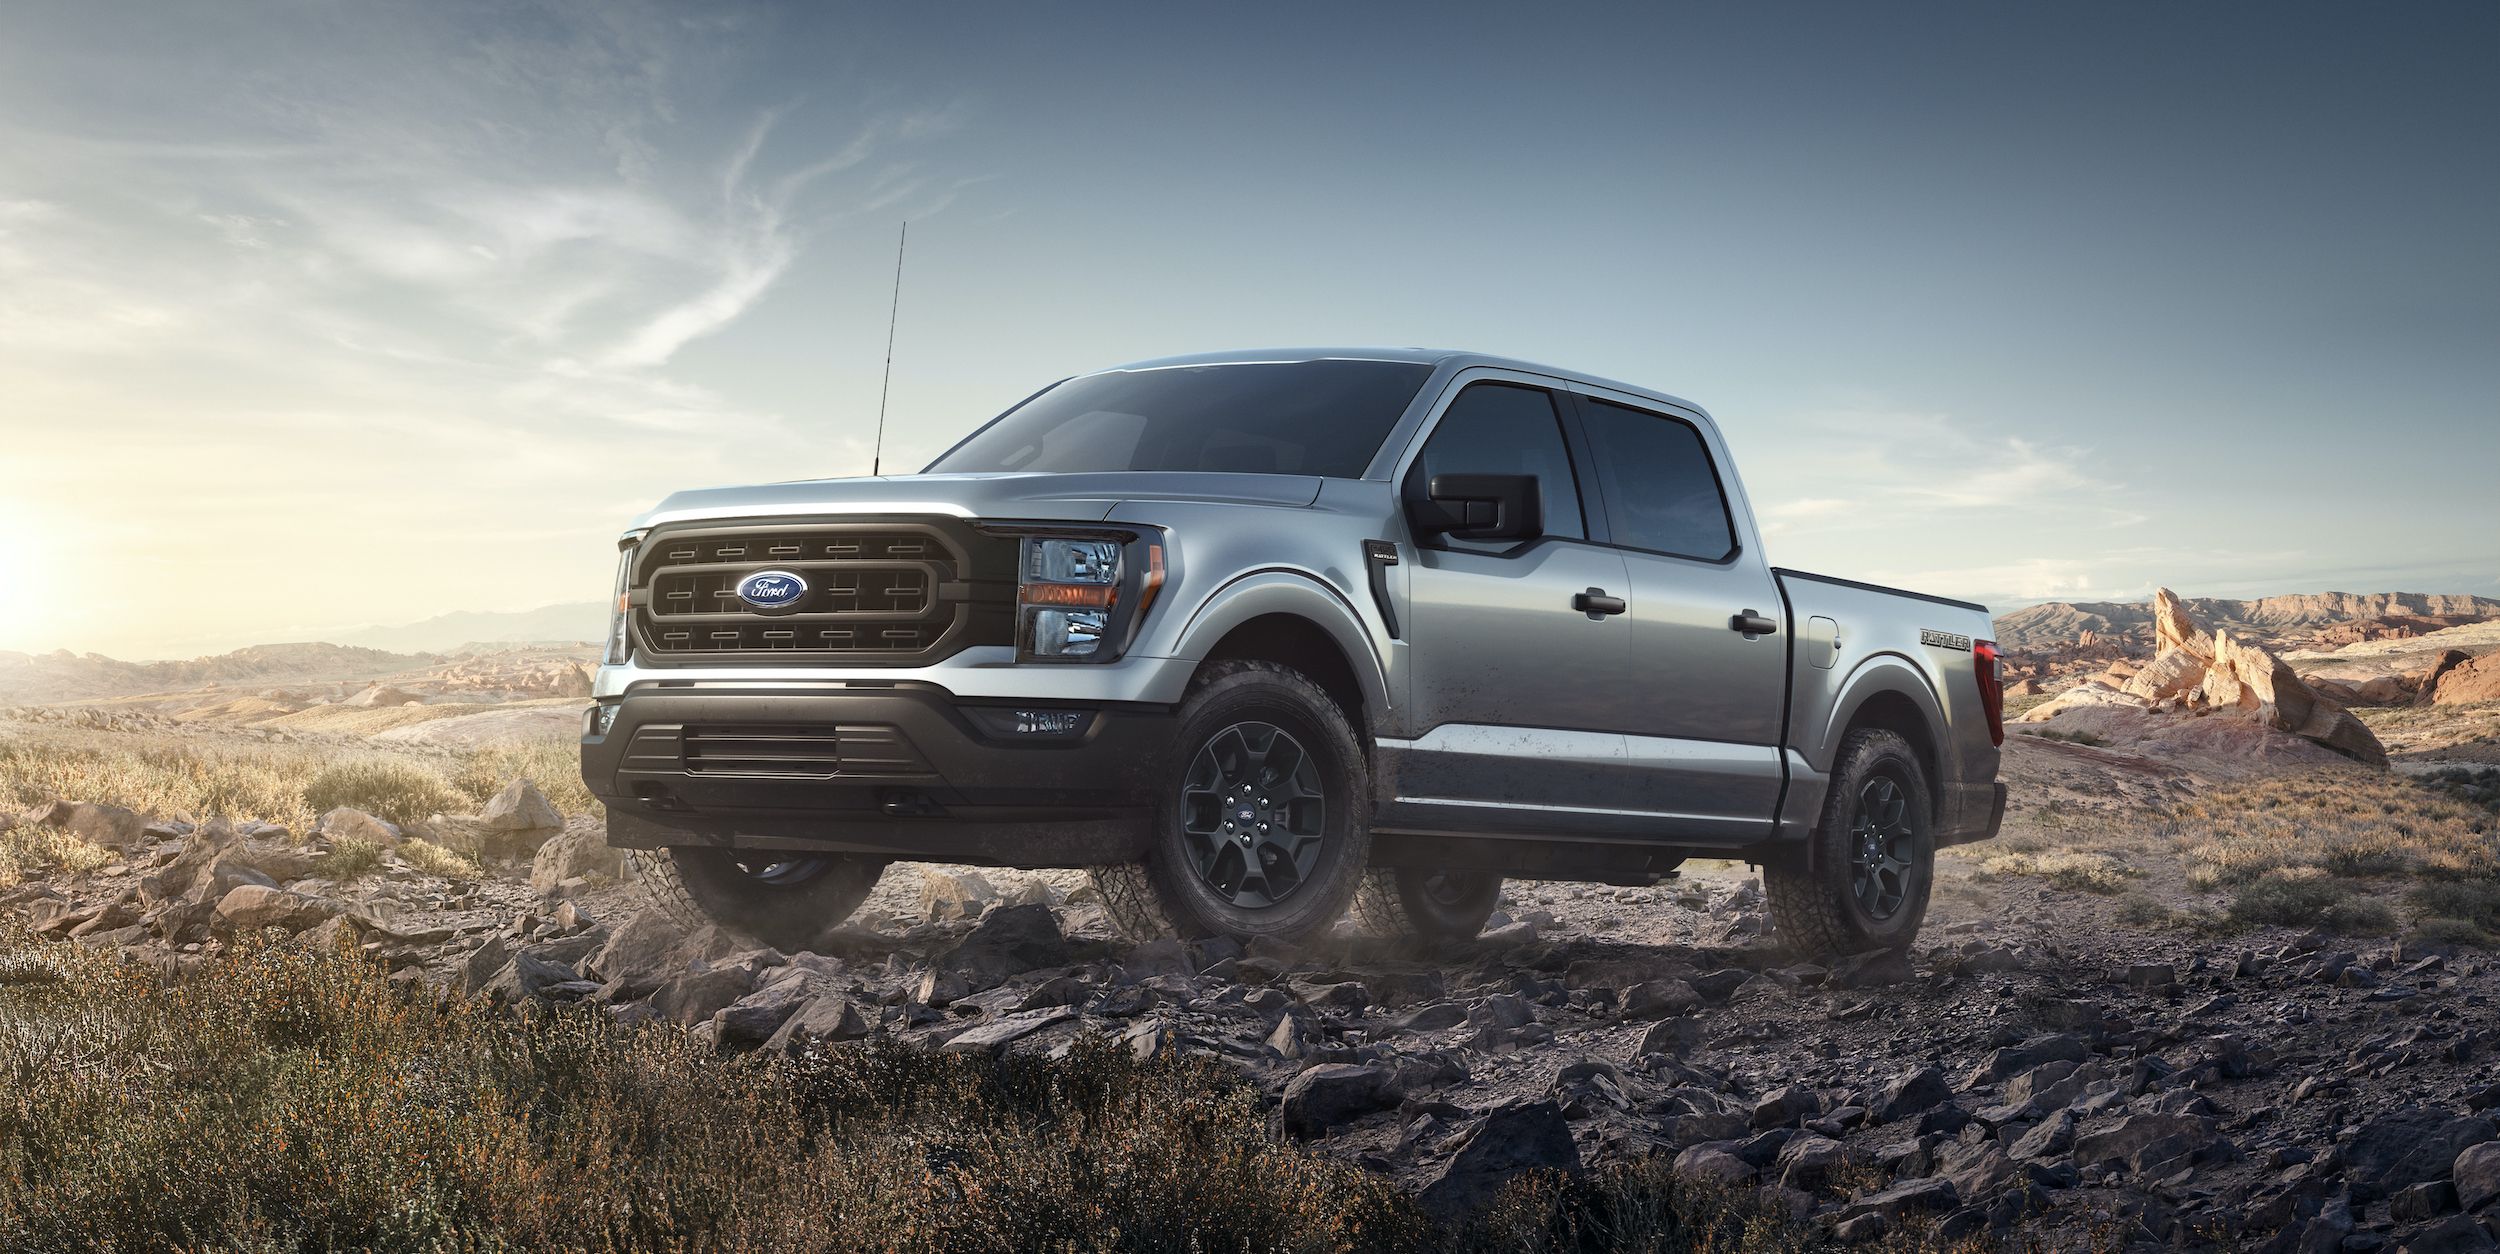 The Rattler is Ford's Entry-Level Off-Road F-150